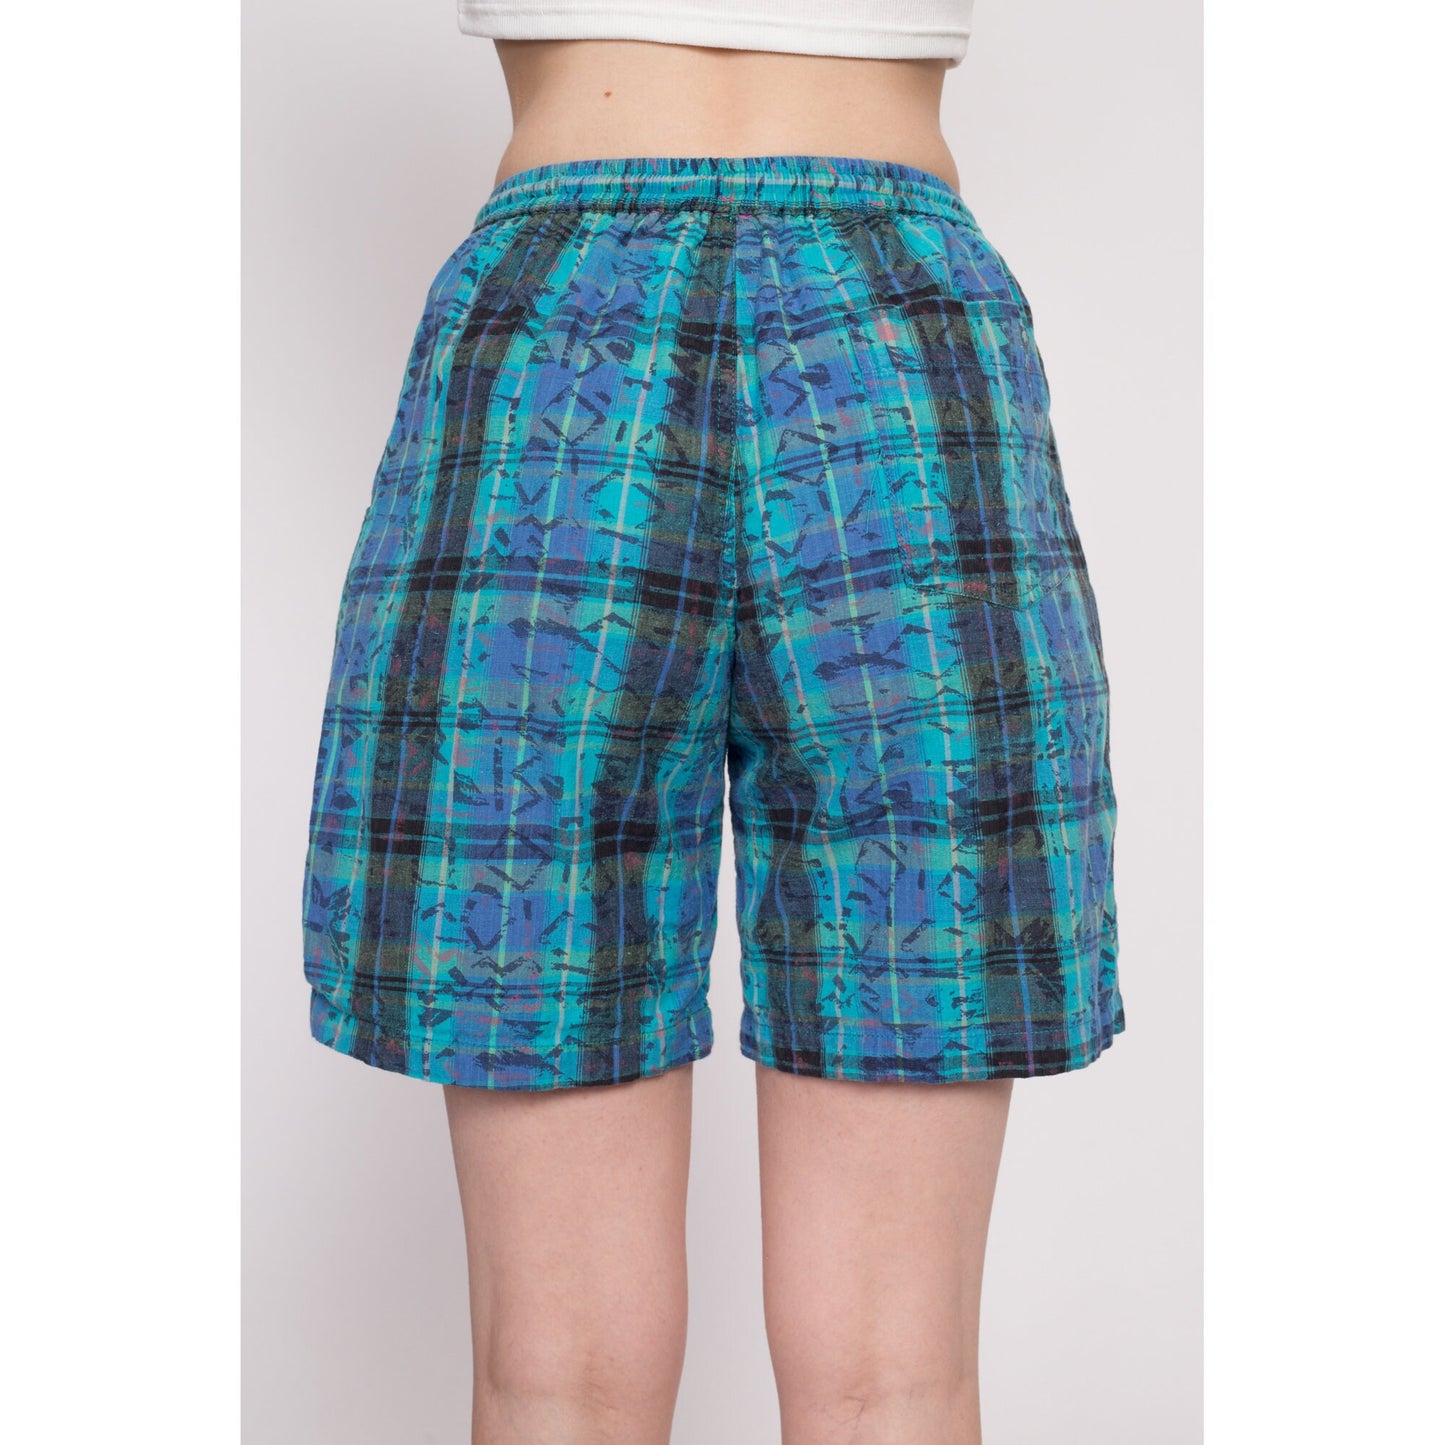 80s Plaid Cotton Board Shorts - Unisex Small | Vintage Blue Green High Waisted Retro Shorts